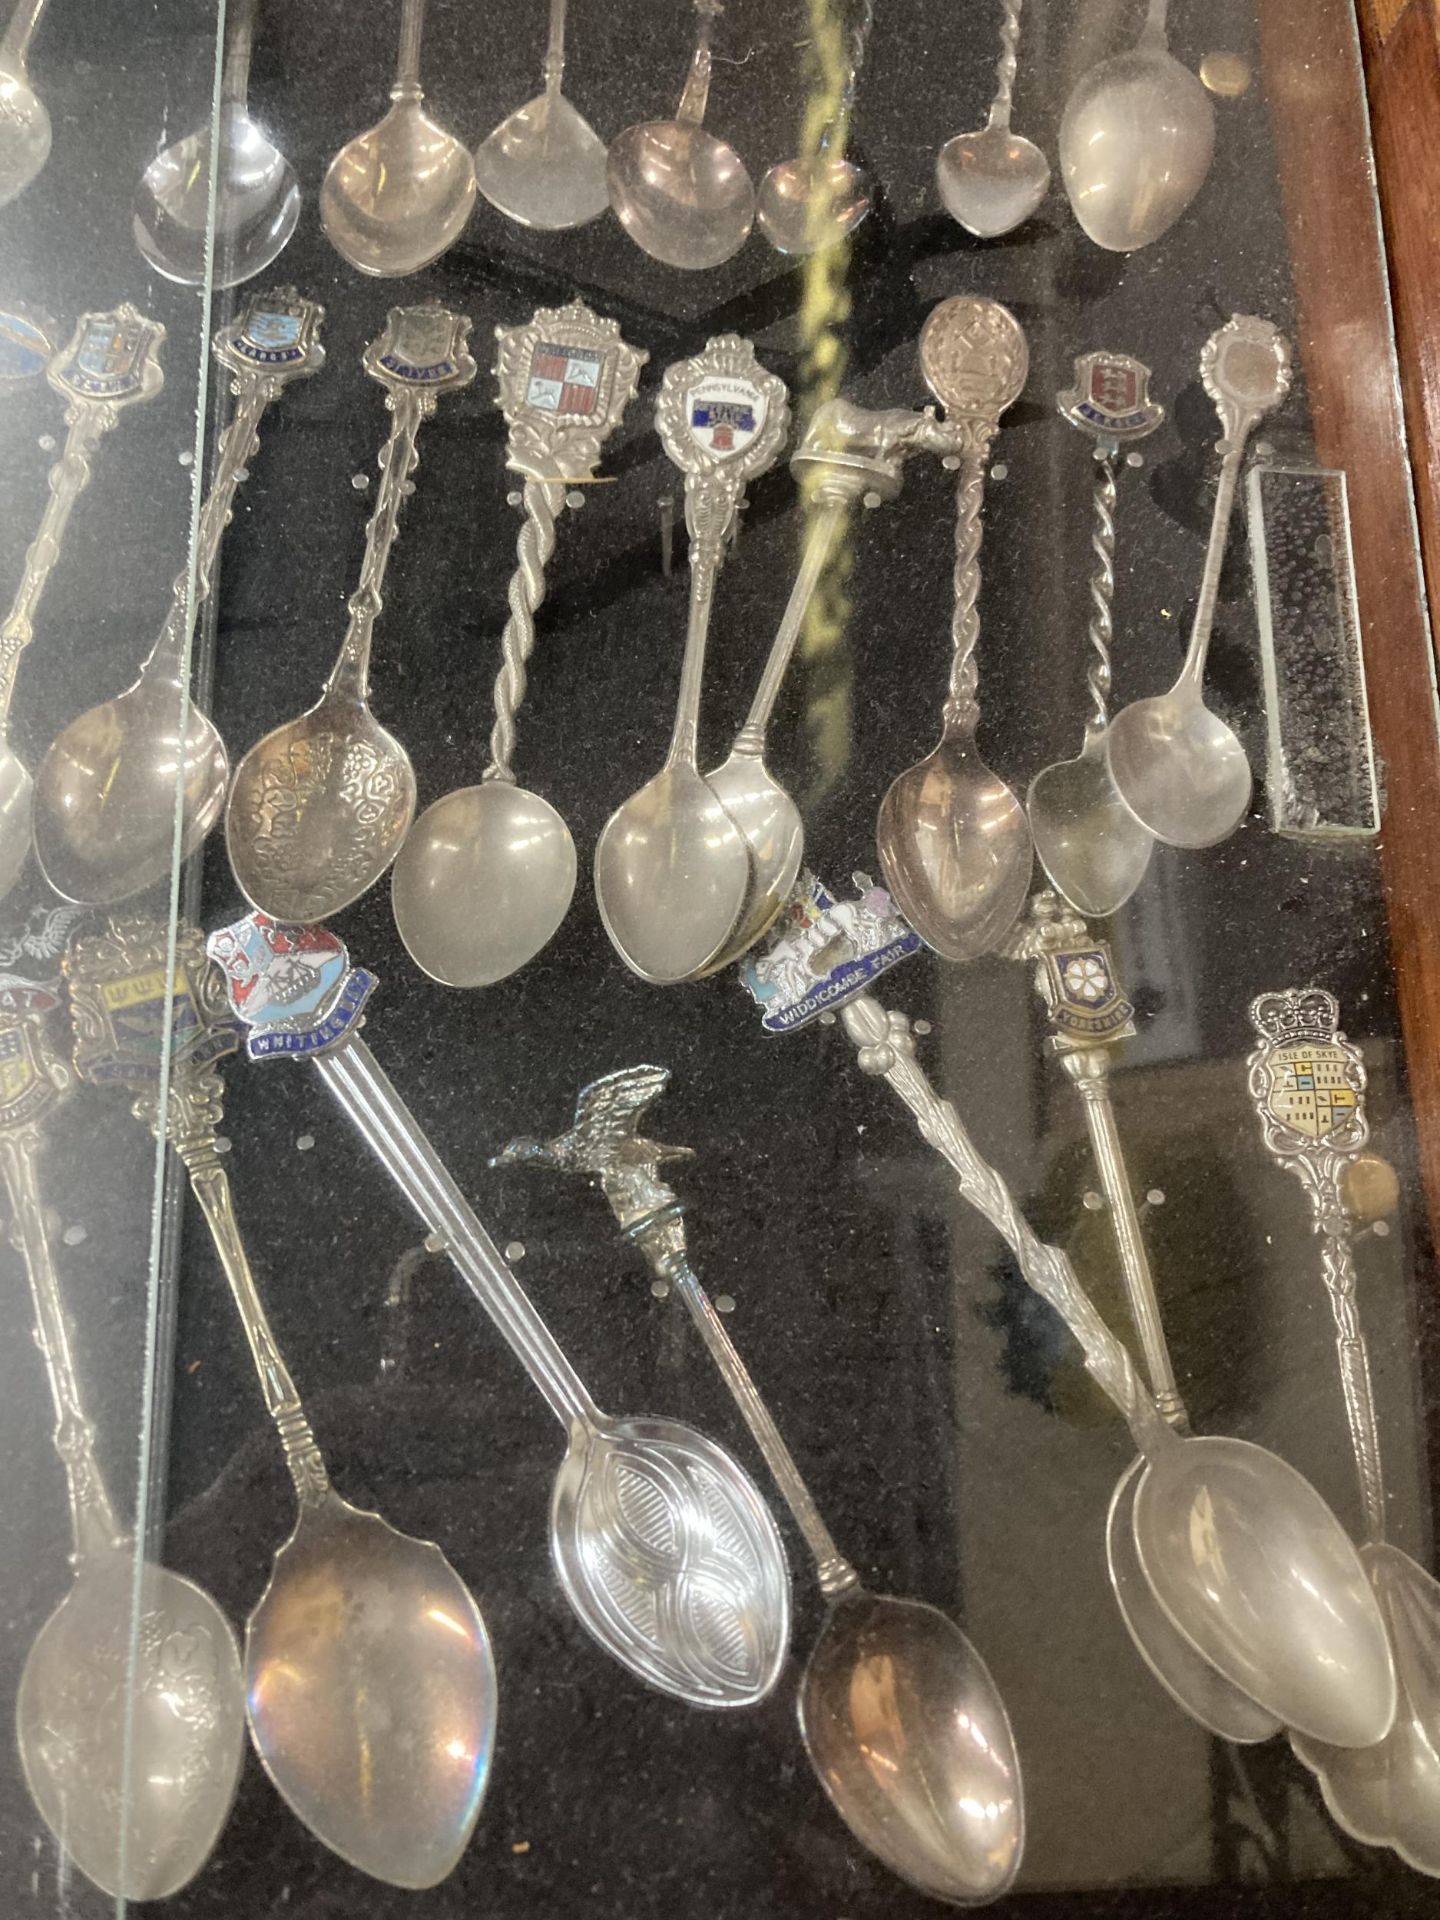 THREE VINTAGE DISPLAY CASES CONTAINING ASSORTED COLLECTABLE SILVER PLATED TEASPOONS - Image 4 of 6